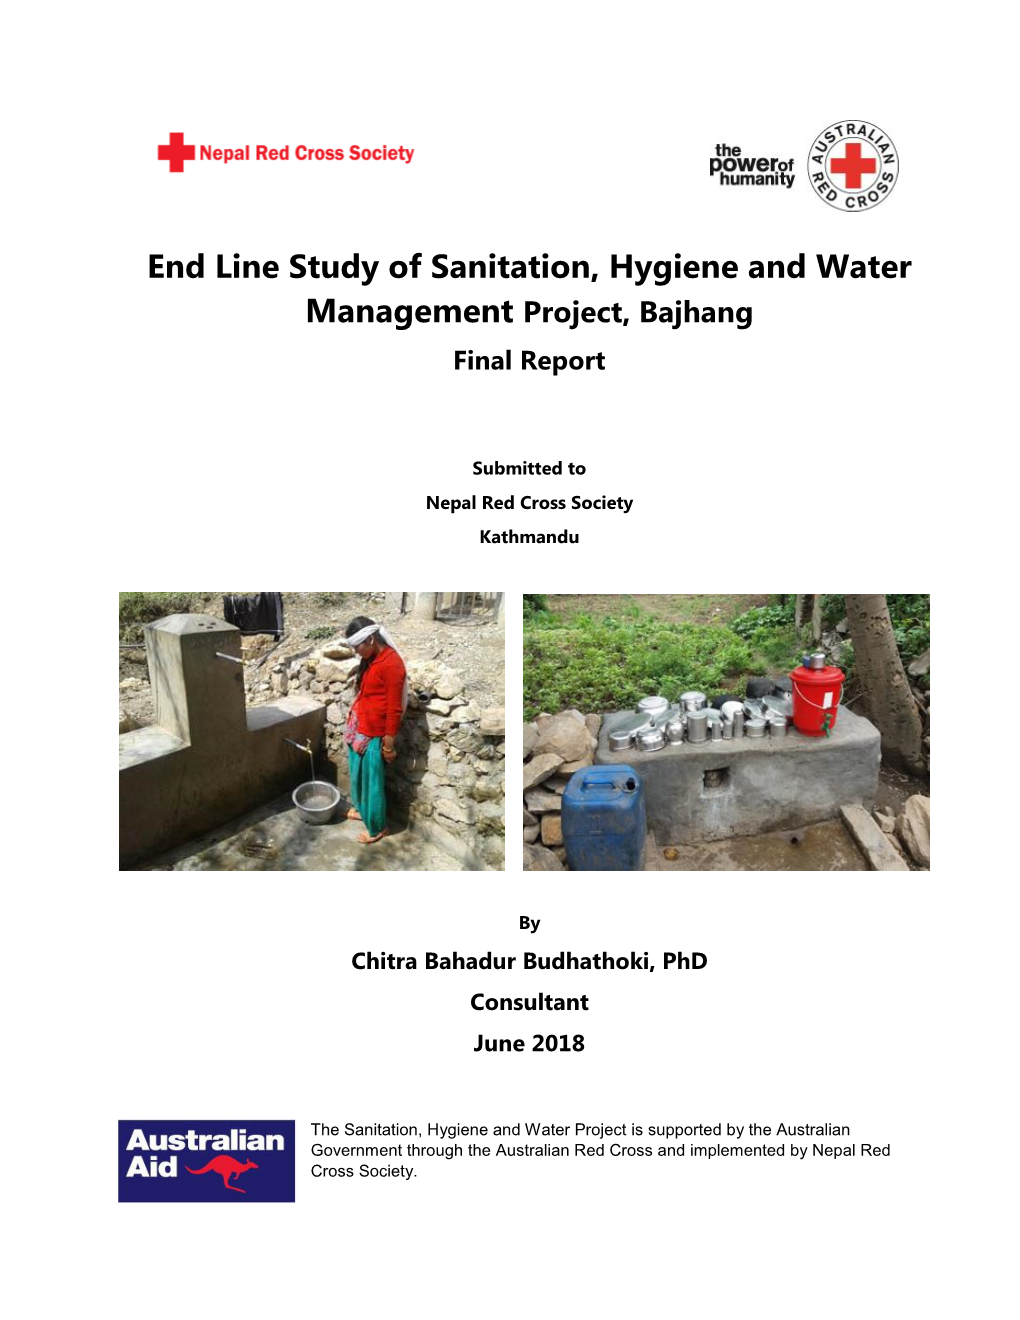 End Line Study of Sanitation, Hygiene and Water Management Project, Bajhang Final Report